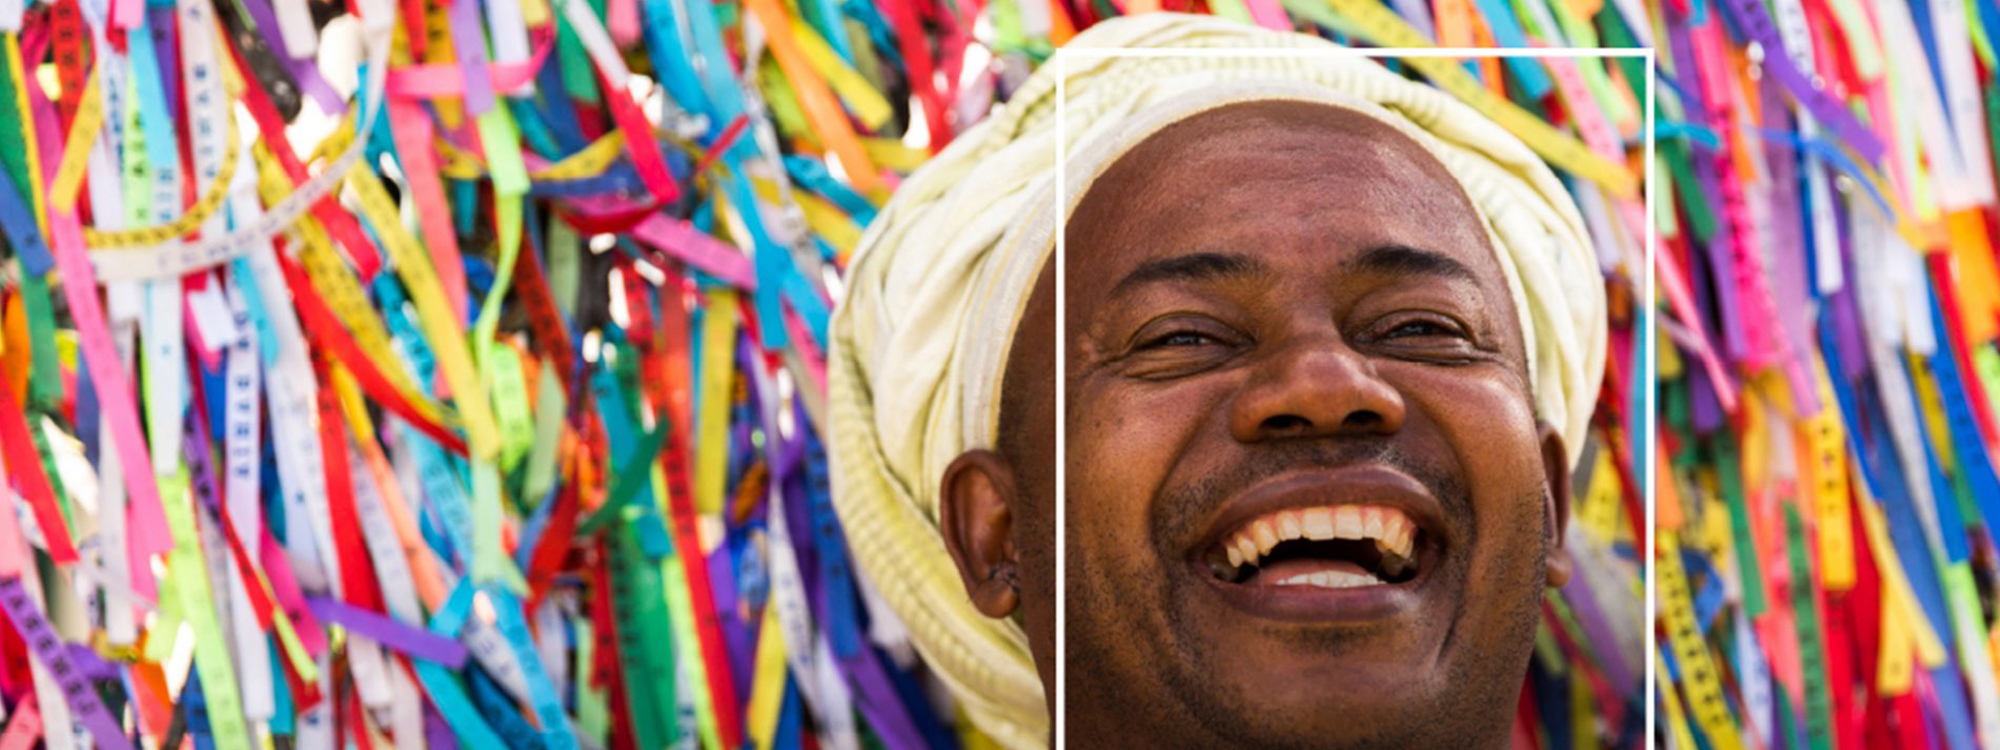 Face of man wearing turban surrounded by colourful confetti